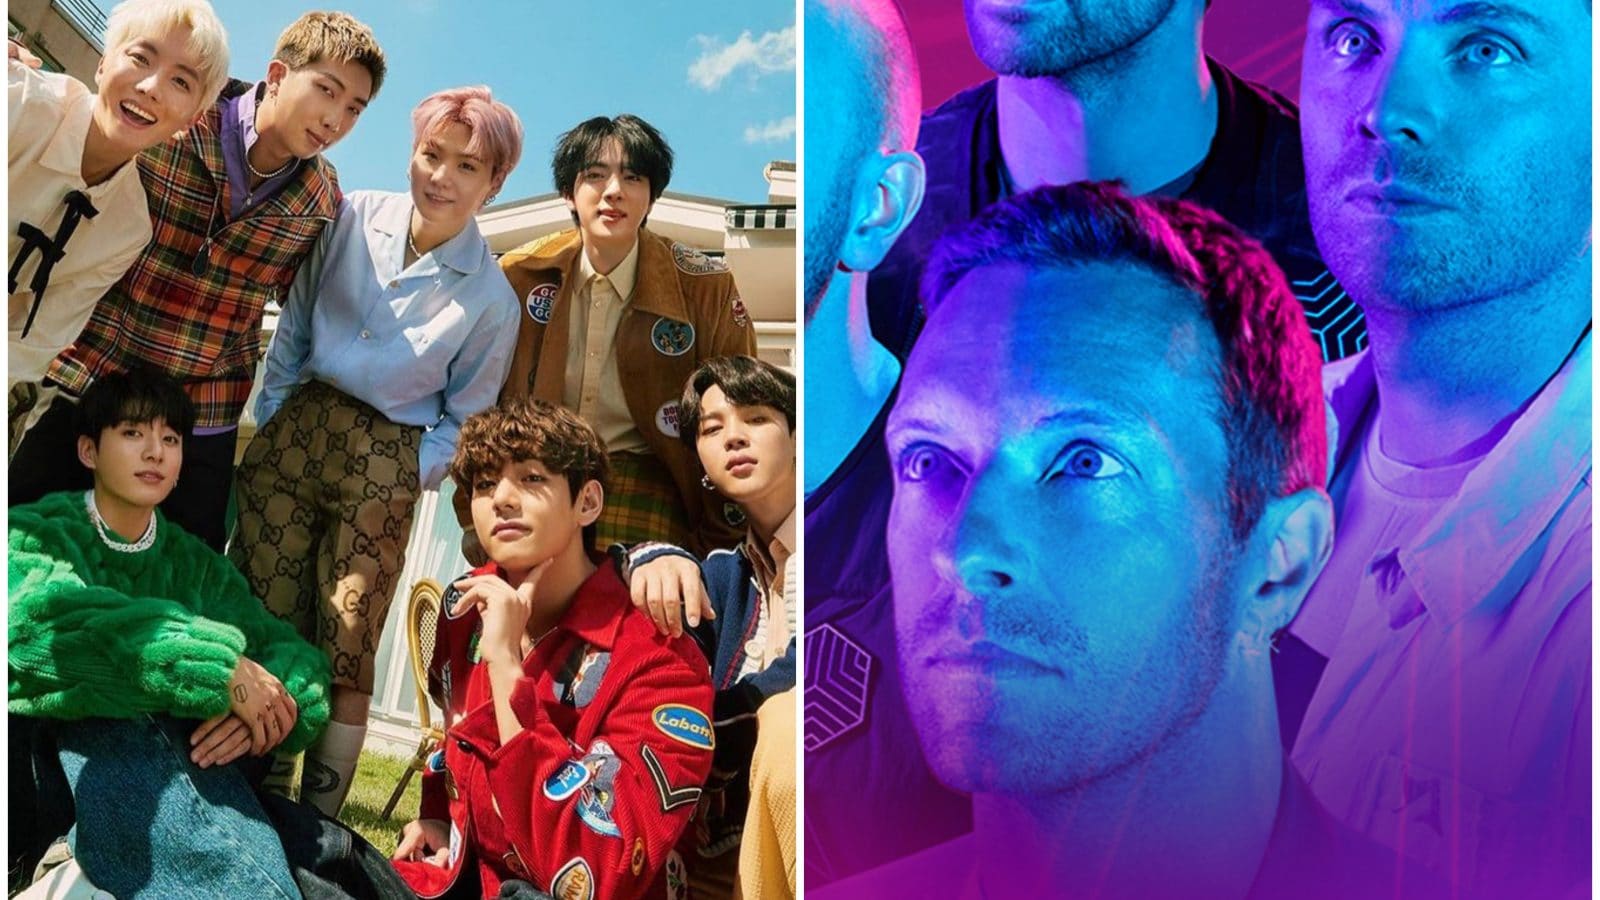 BTS and Coldplay Come Together in Epic Collaboration on New Single Titled My Universe, Out on Sep 24